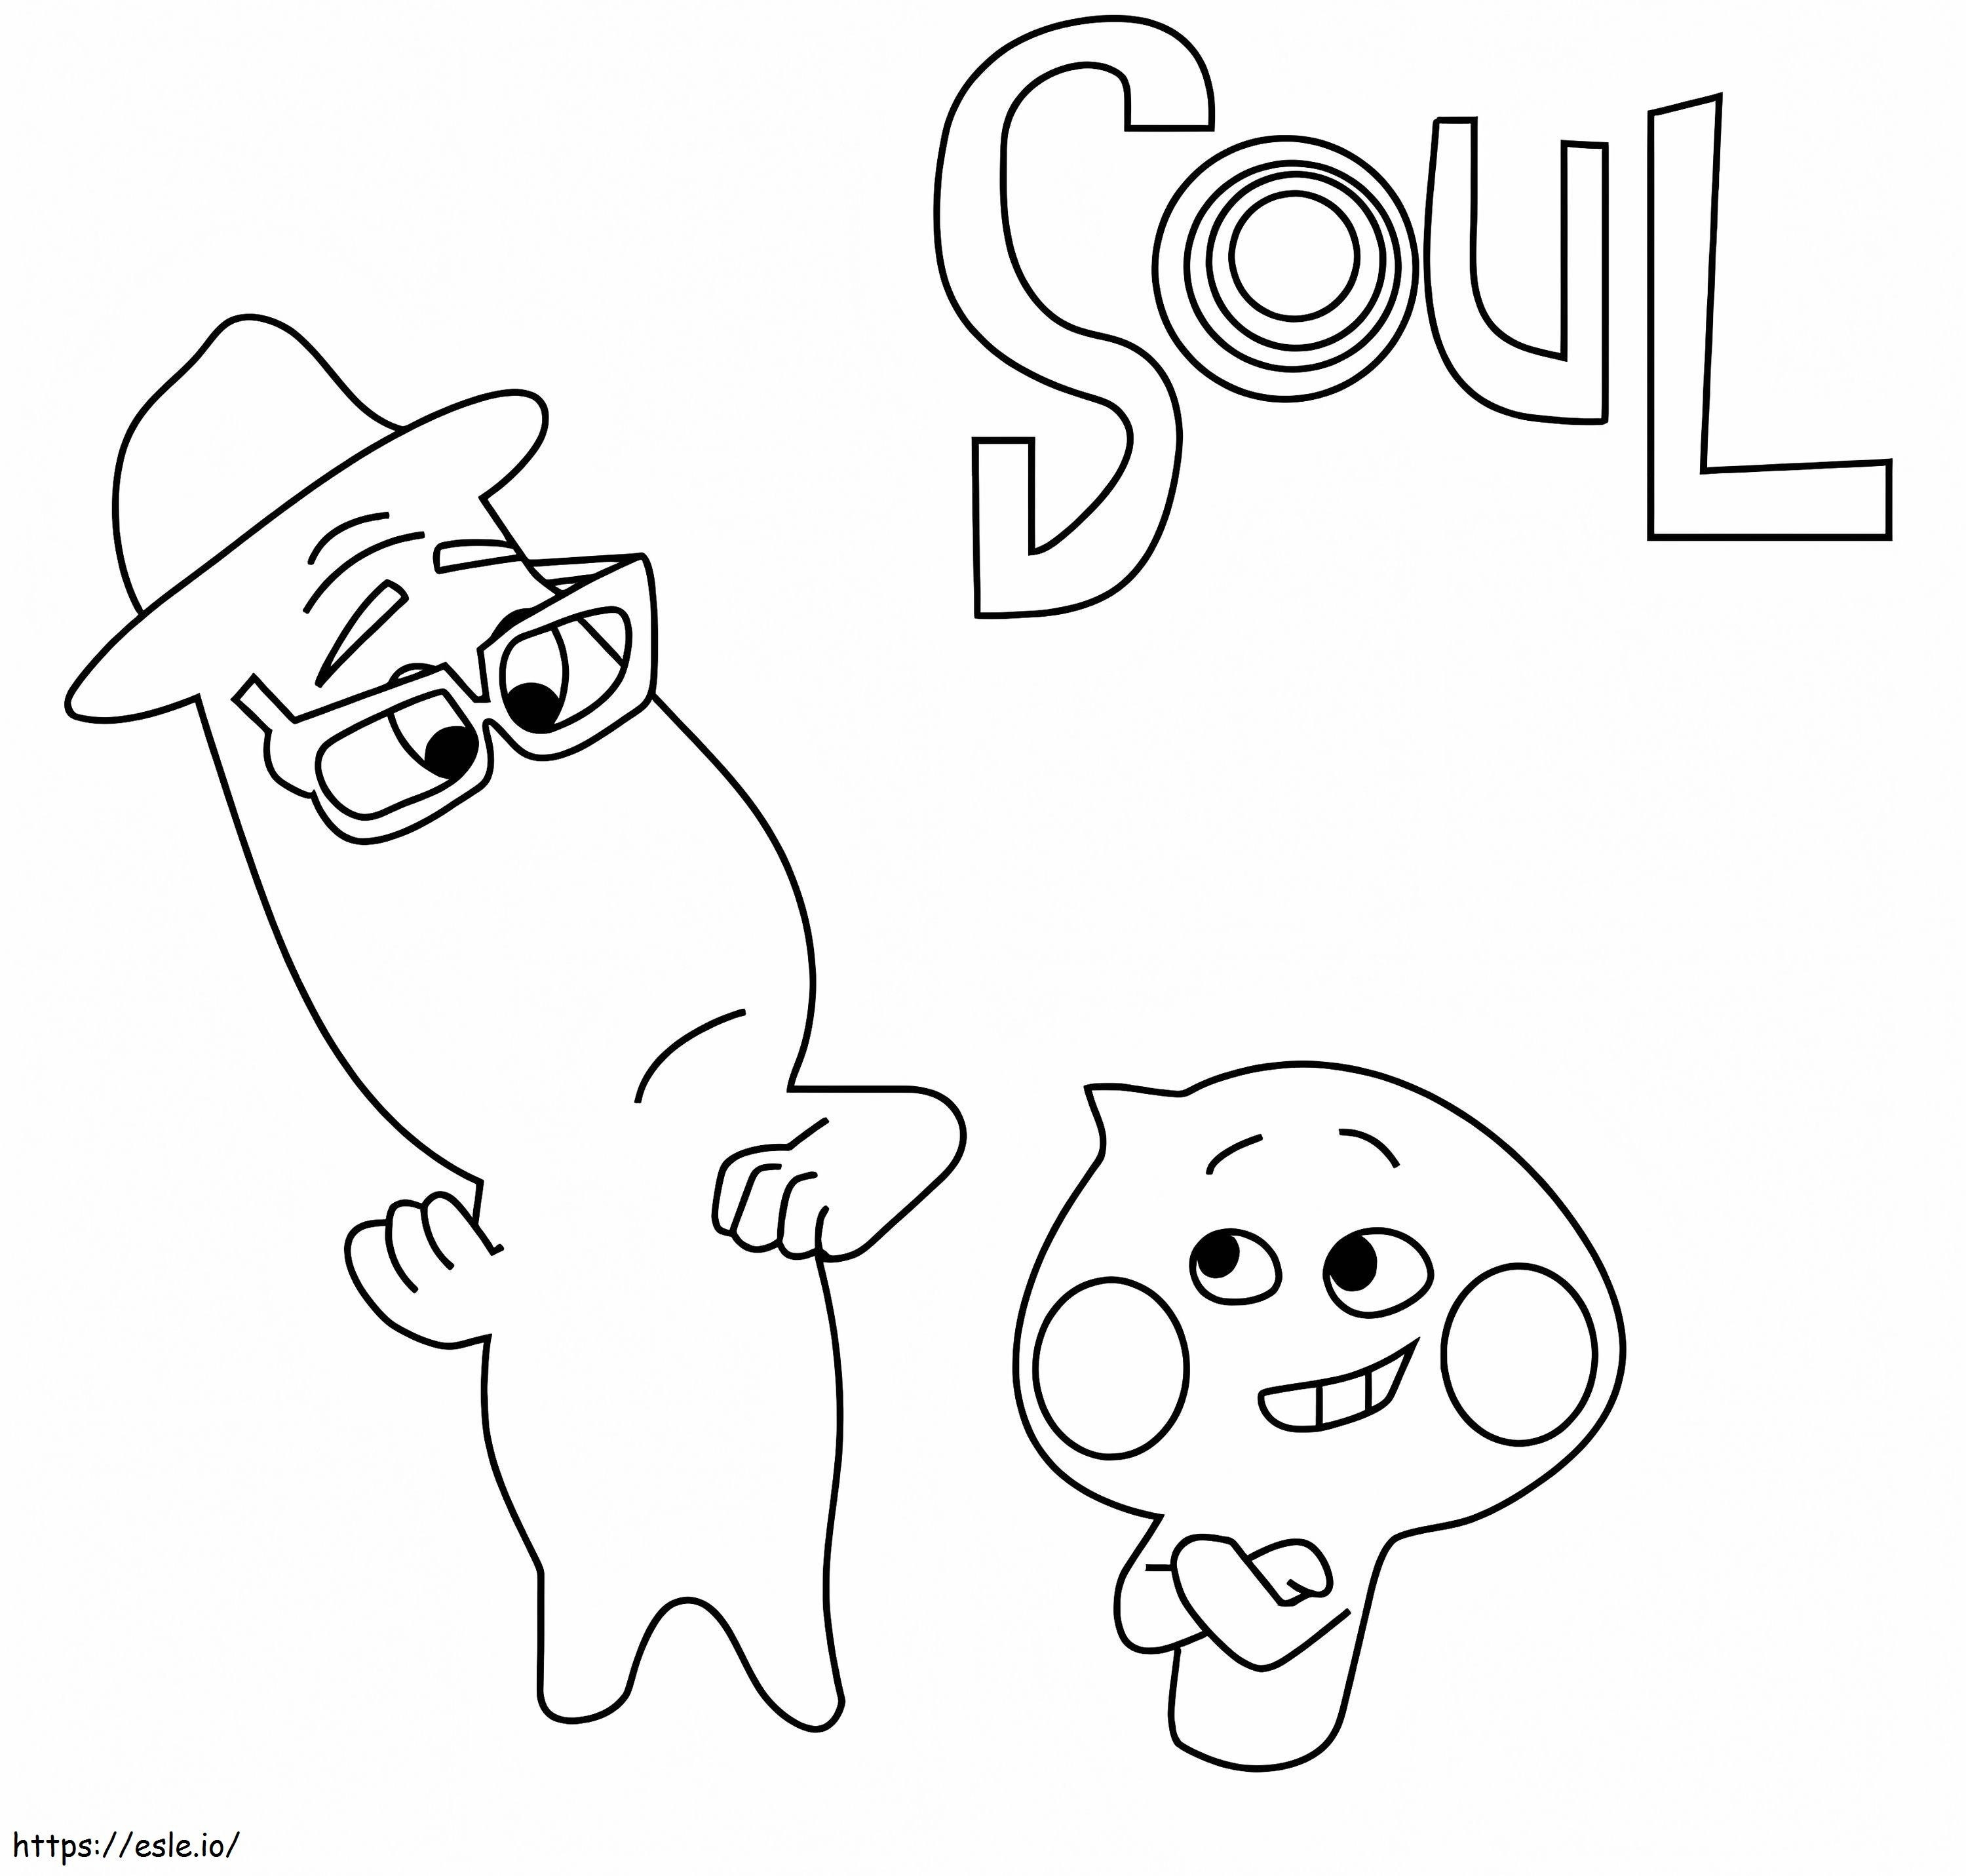 Joe Gardner And 22 From Soul 1 coloring page